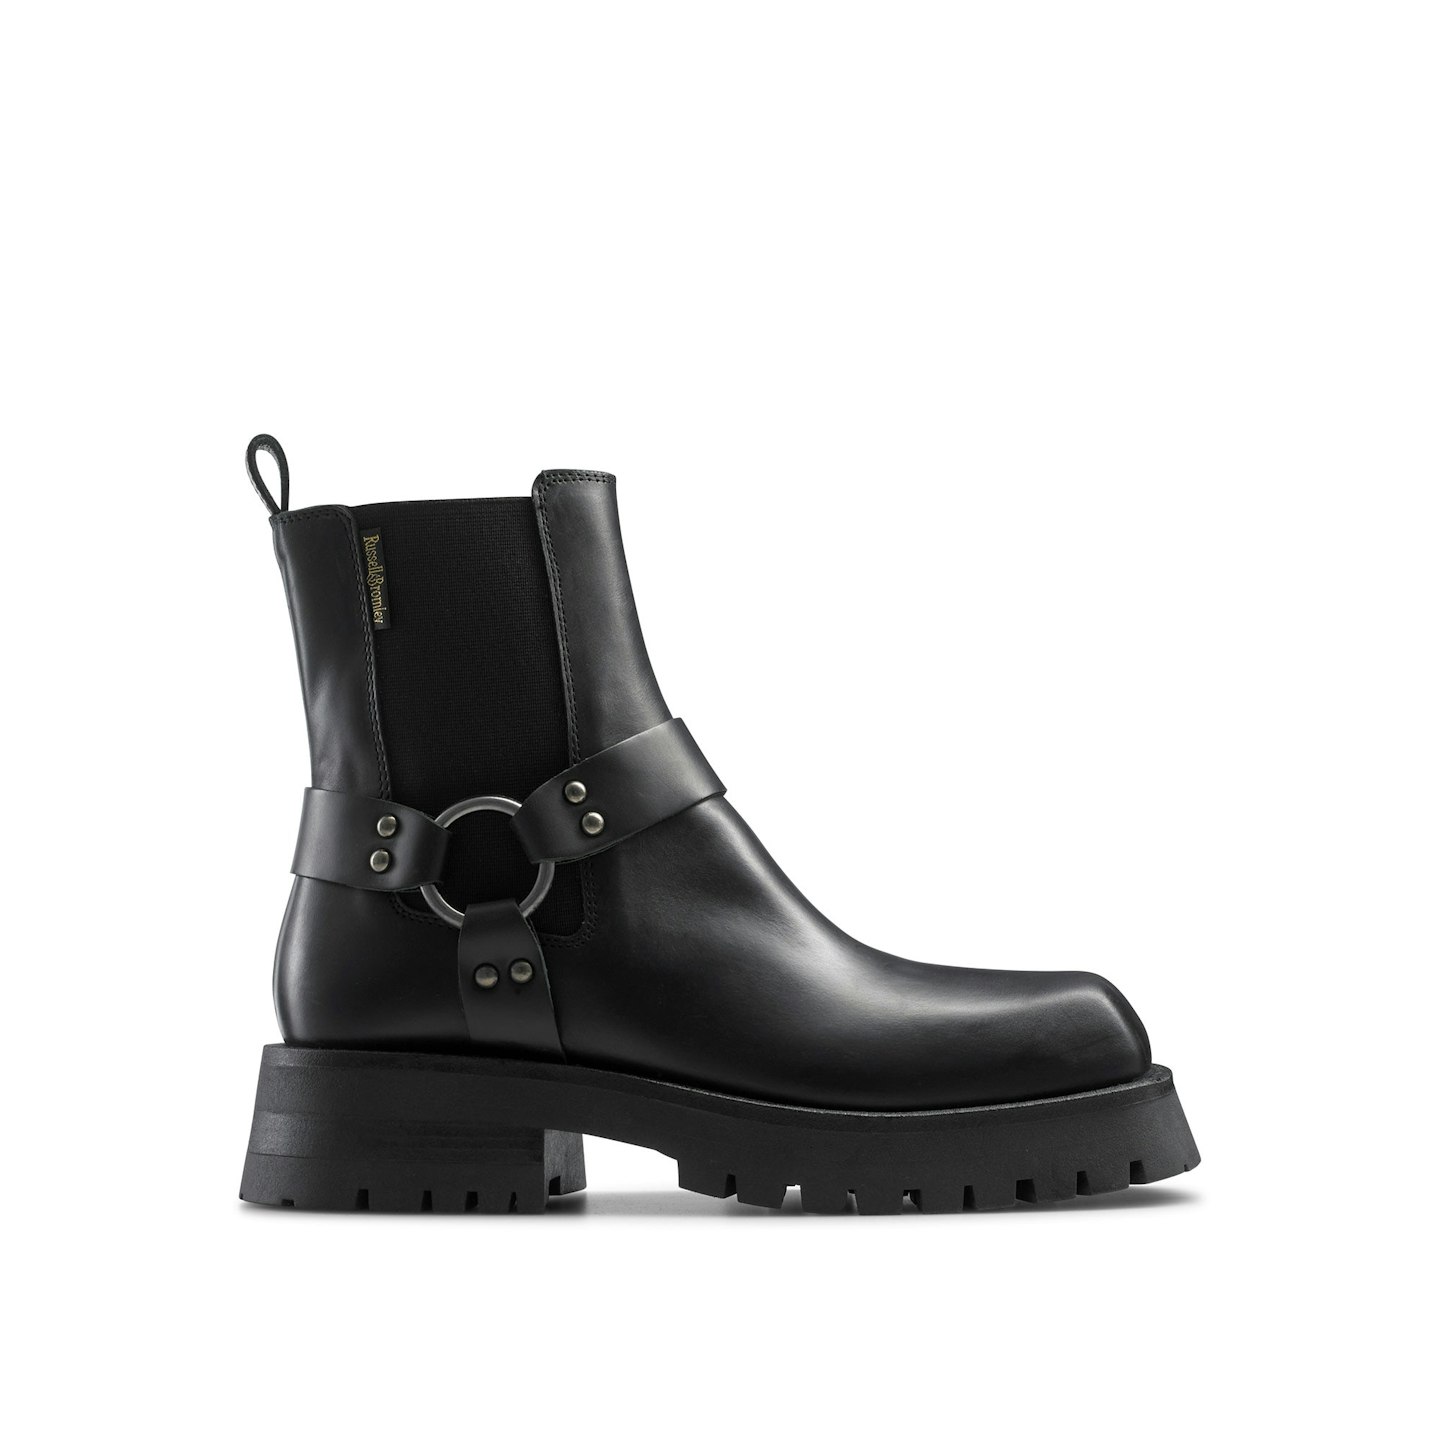 Russell & Bromley, Harness Feature Chelsea Boots